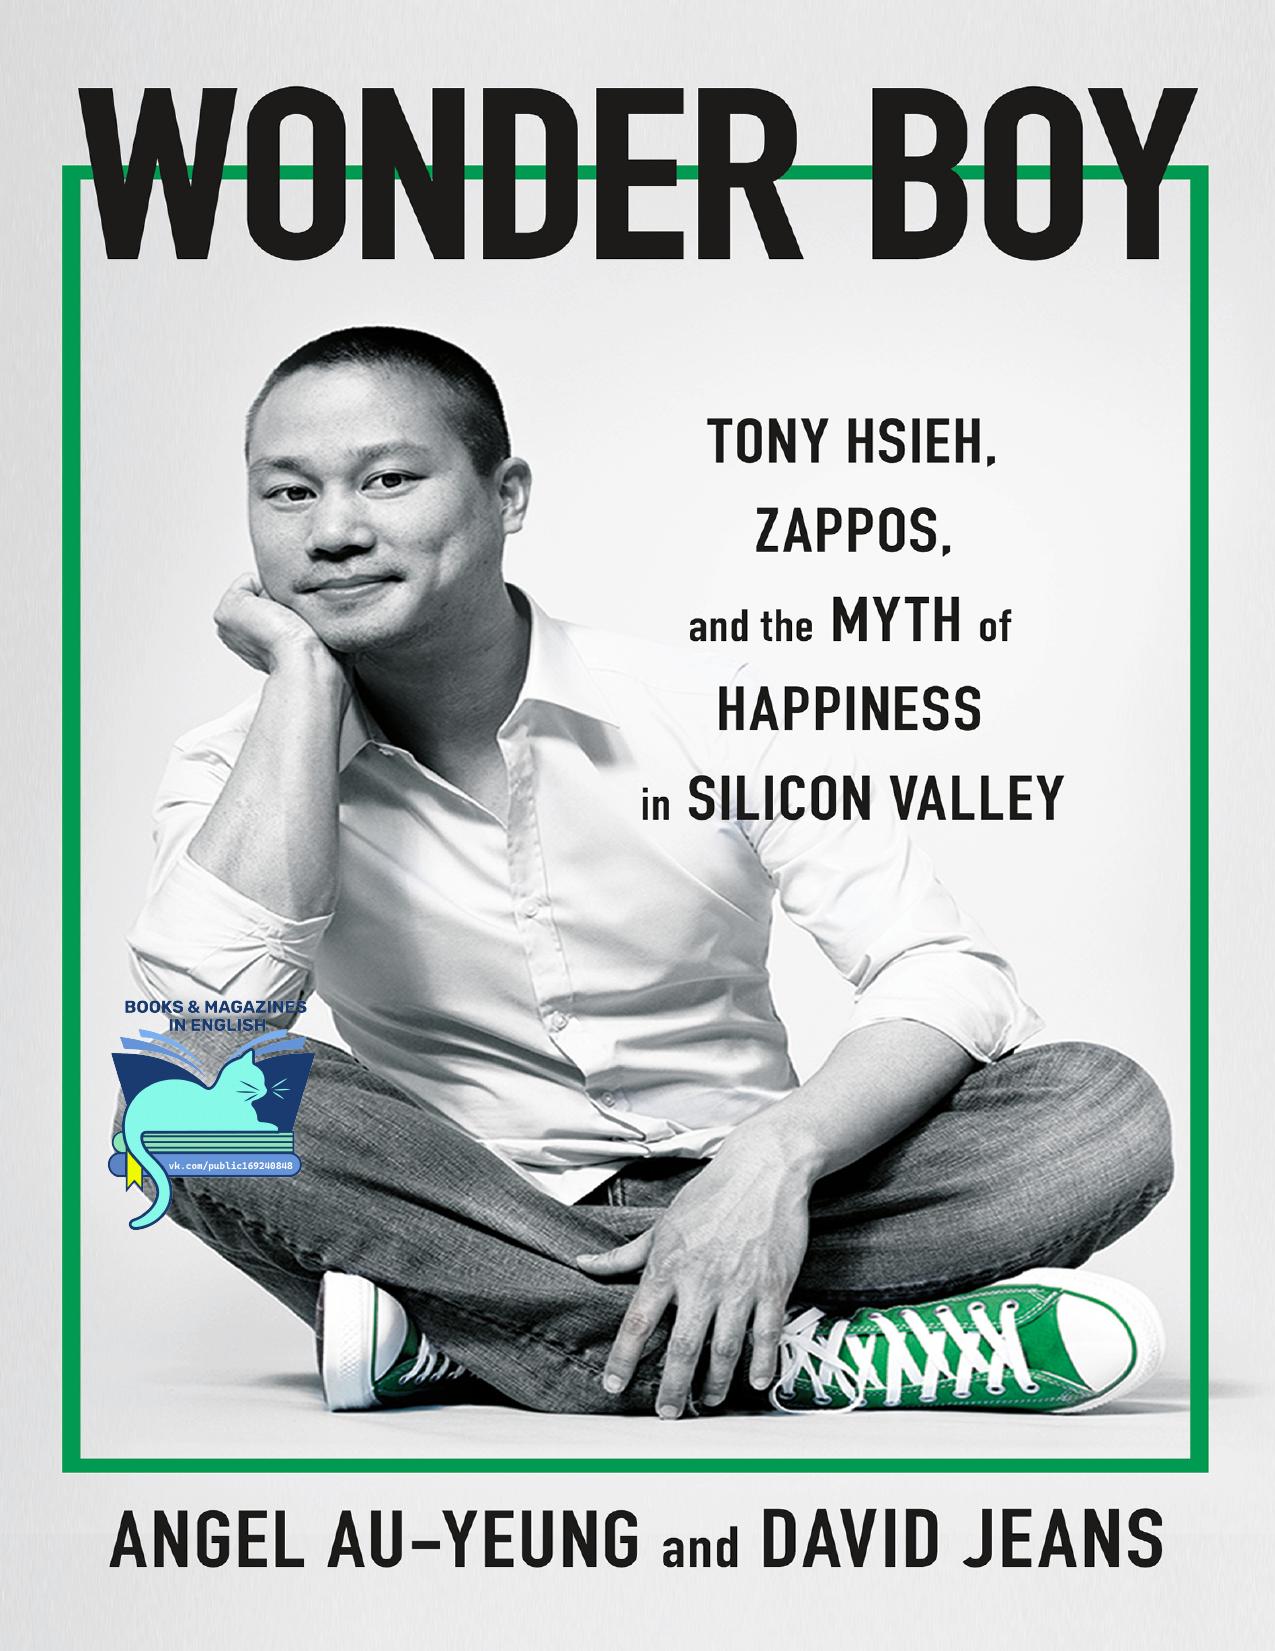 Tony Hsieh  (1973-2020) Biography - Wonder Boy: Tony Hsieh (Anthony Hsieh) , Zappos, and the Myth of Happiness in Silicon Valley , Happy At Any Cost by Angel Au-Yeung David Jeans Kirsten Grind Katherine Sayre